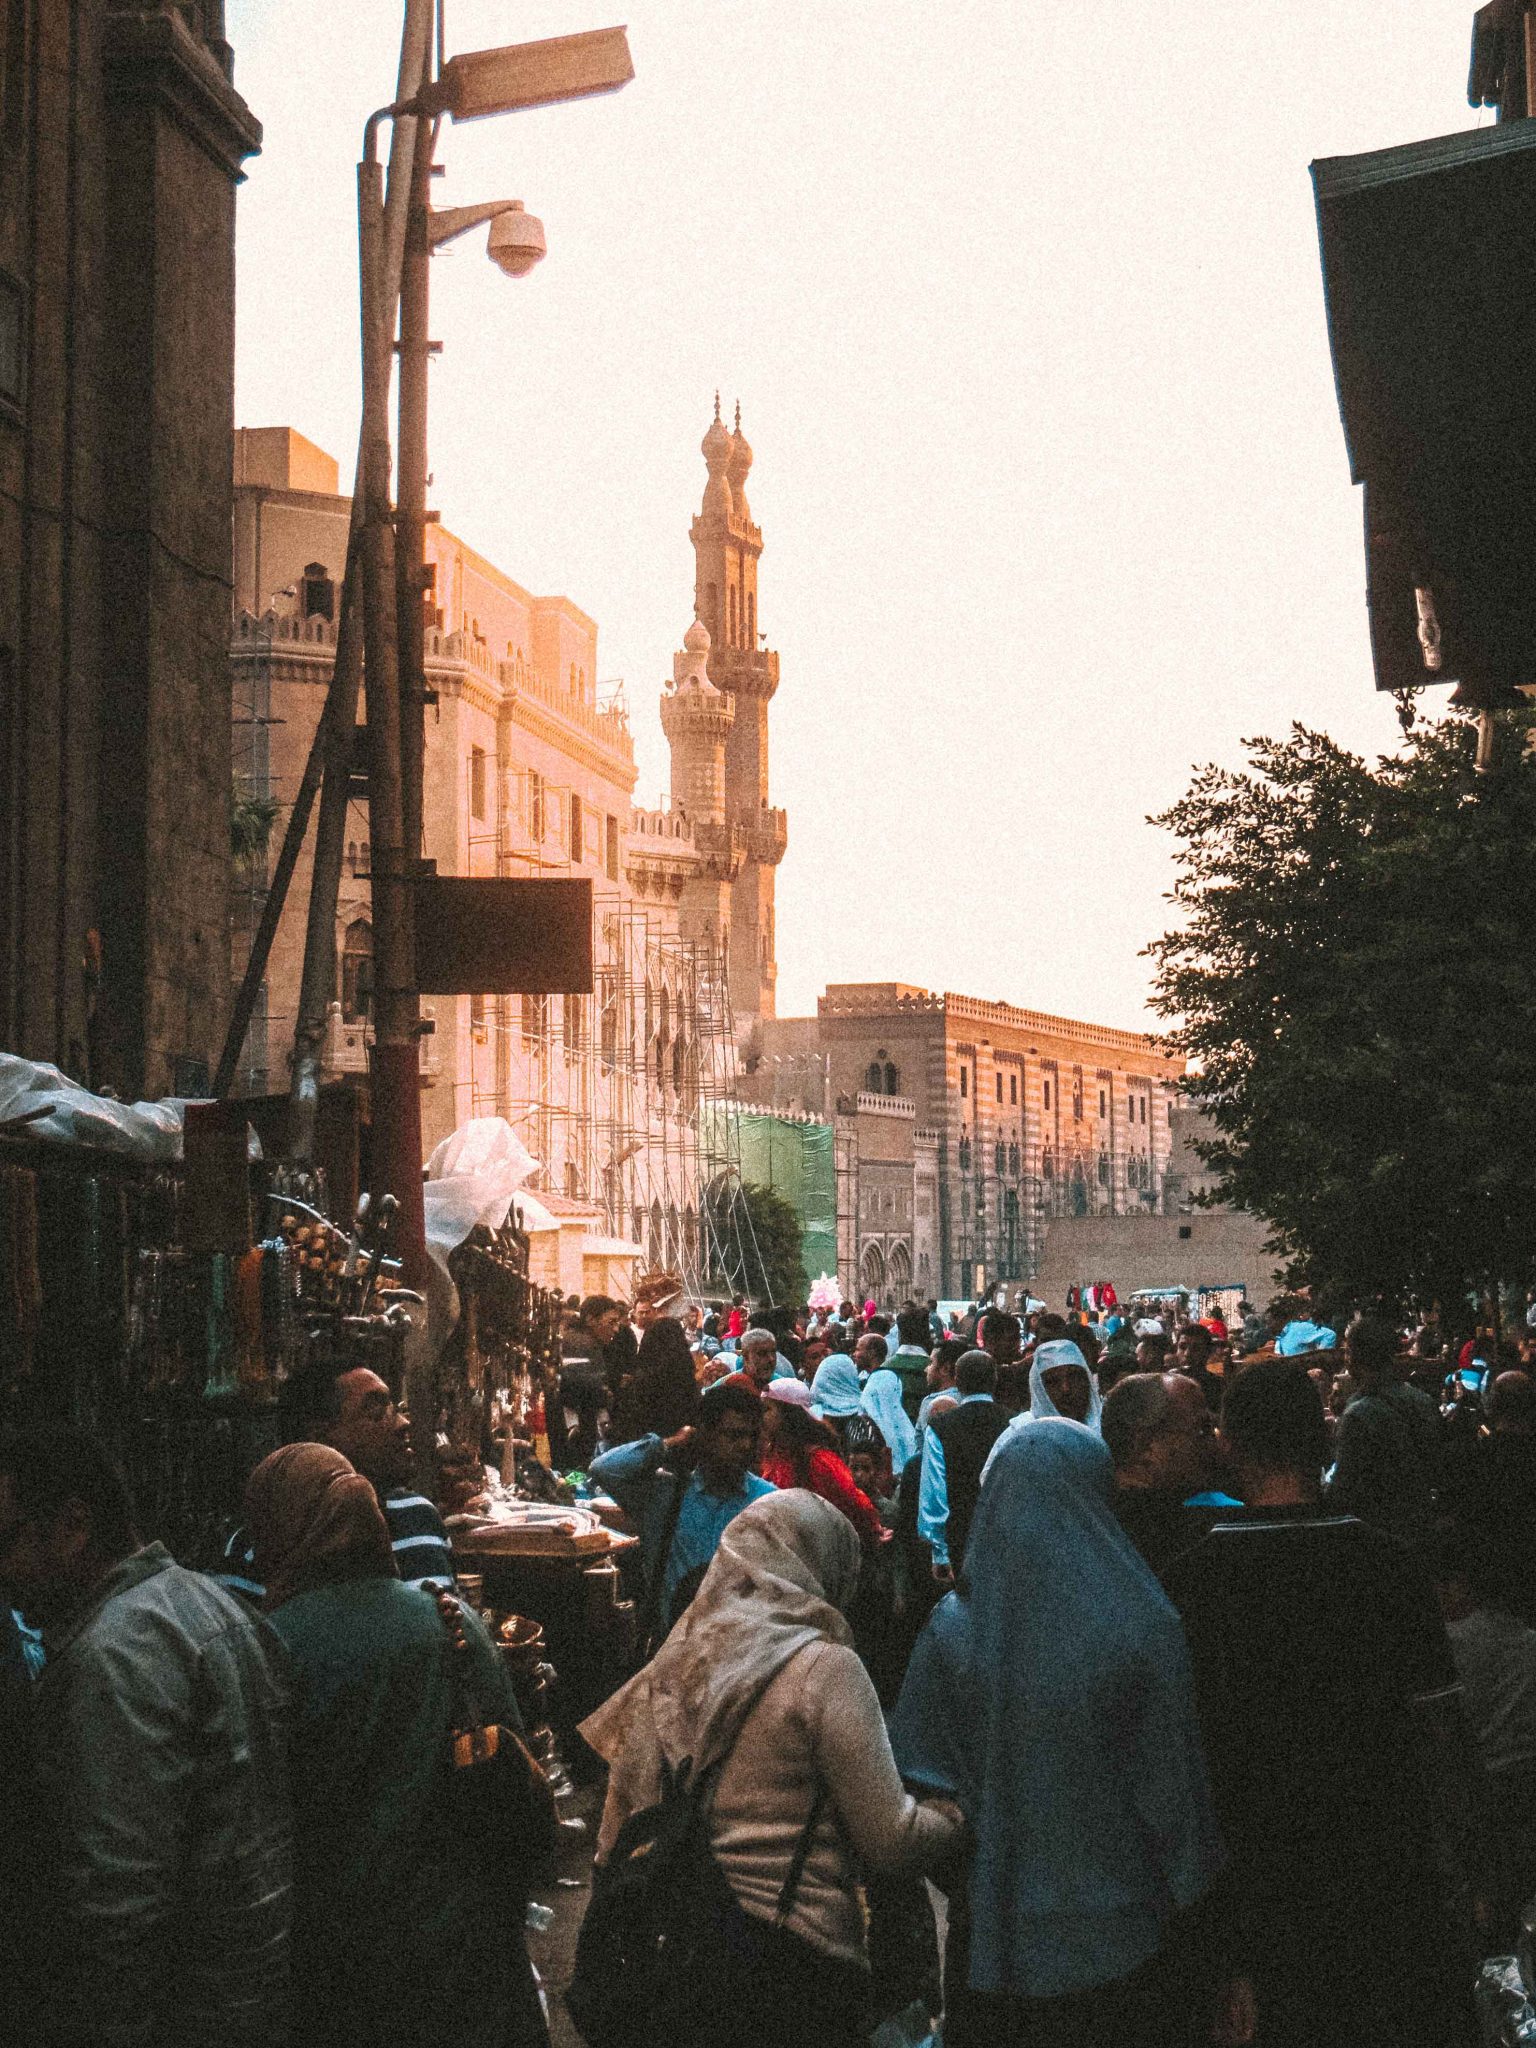 A city view in Egypt with people